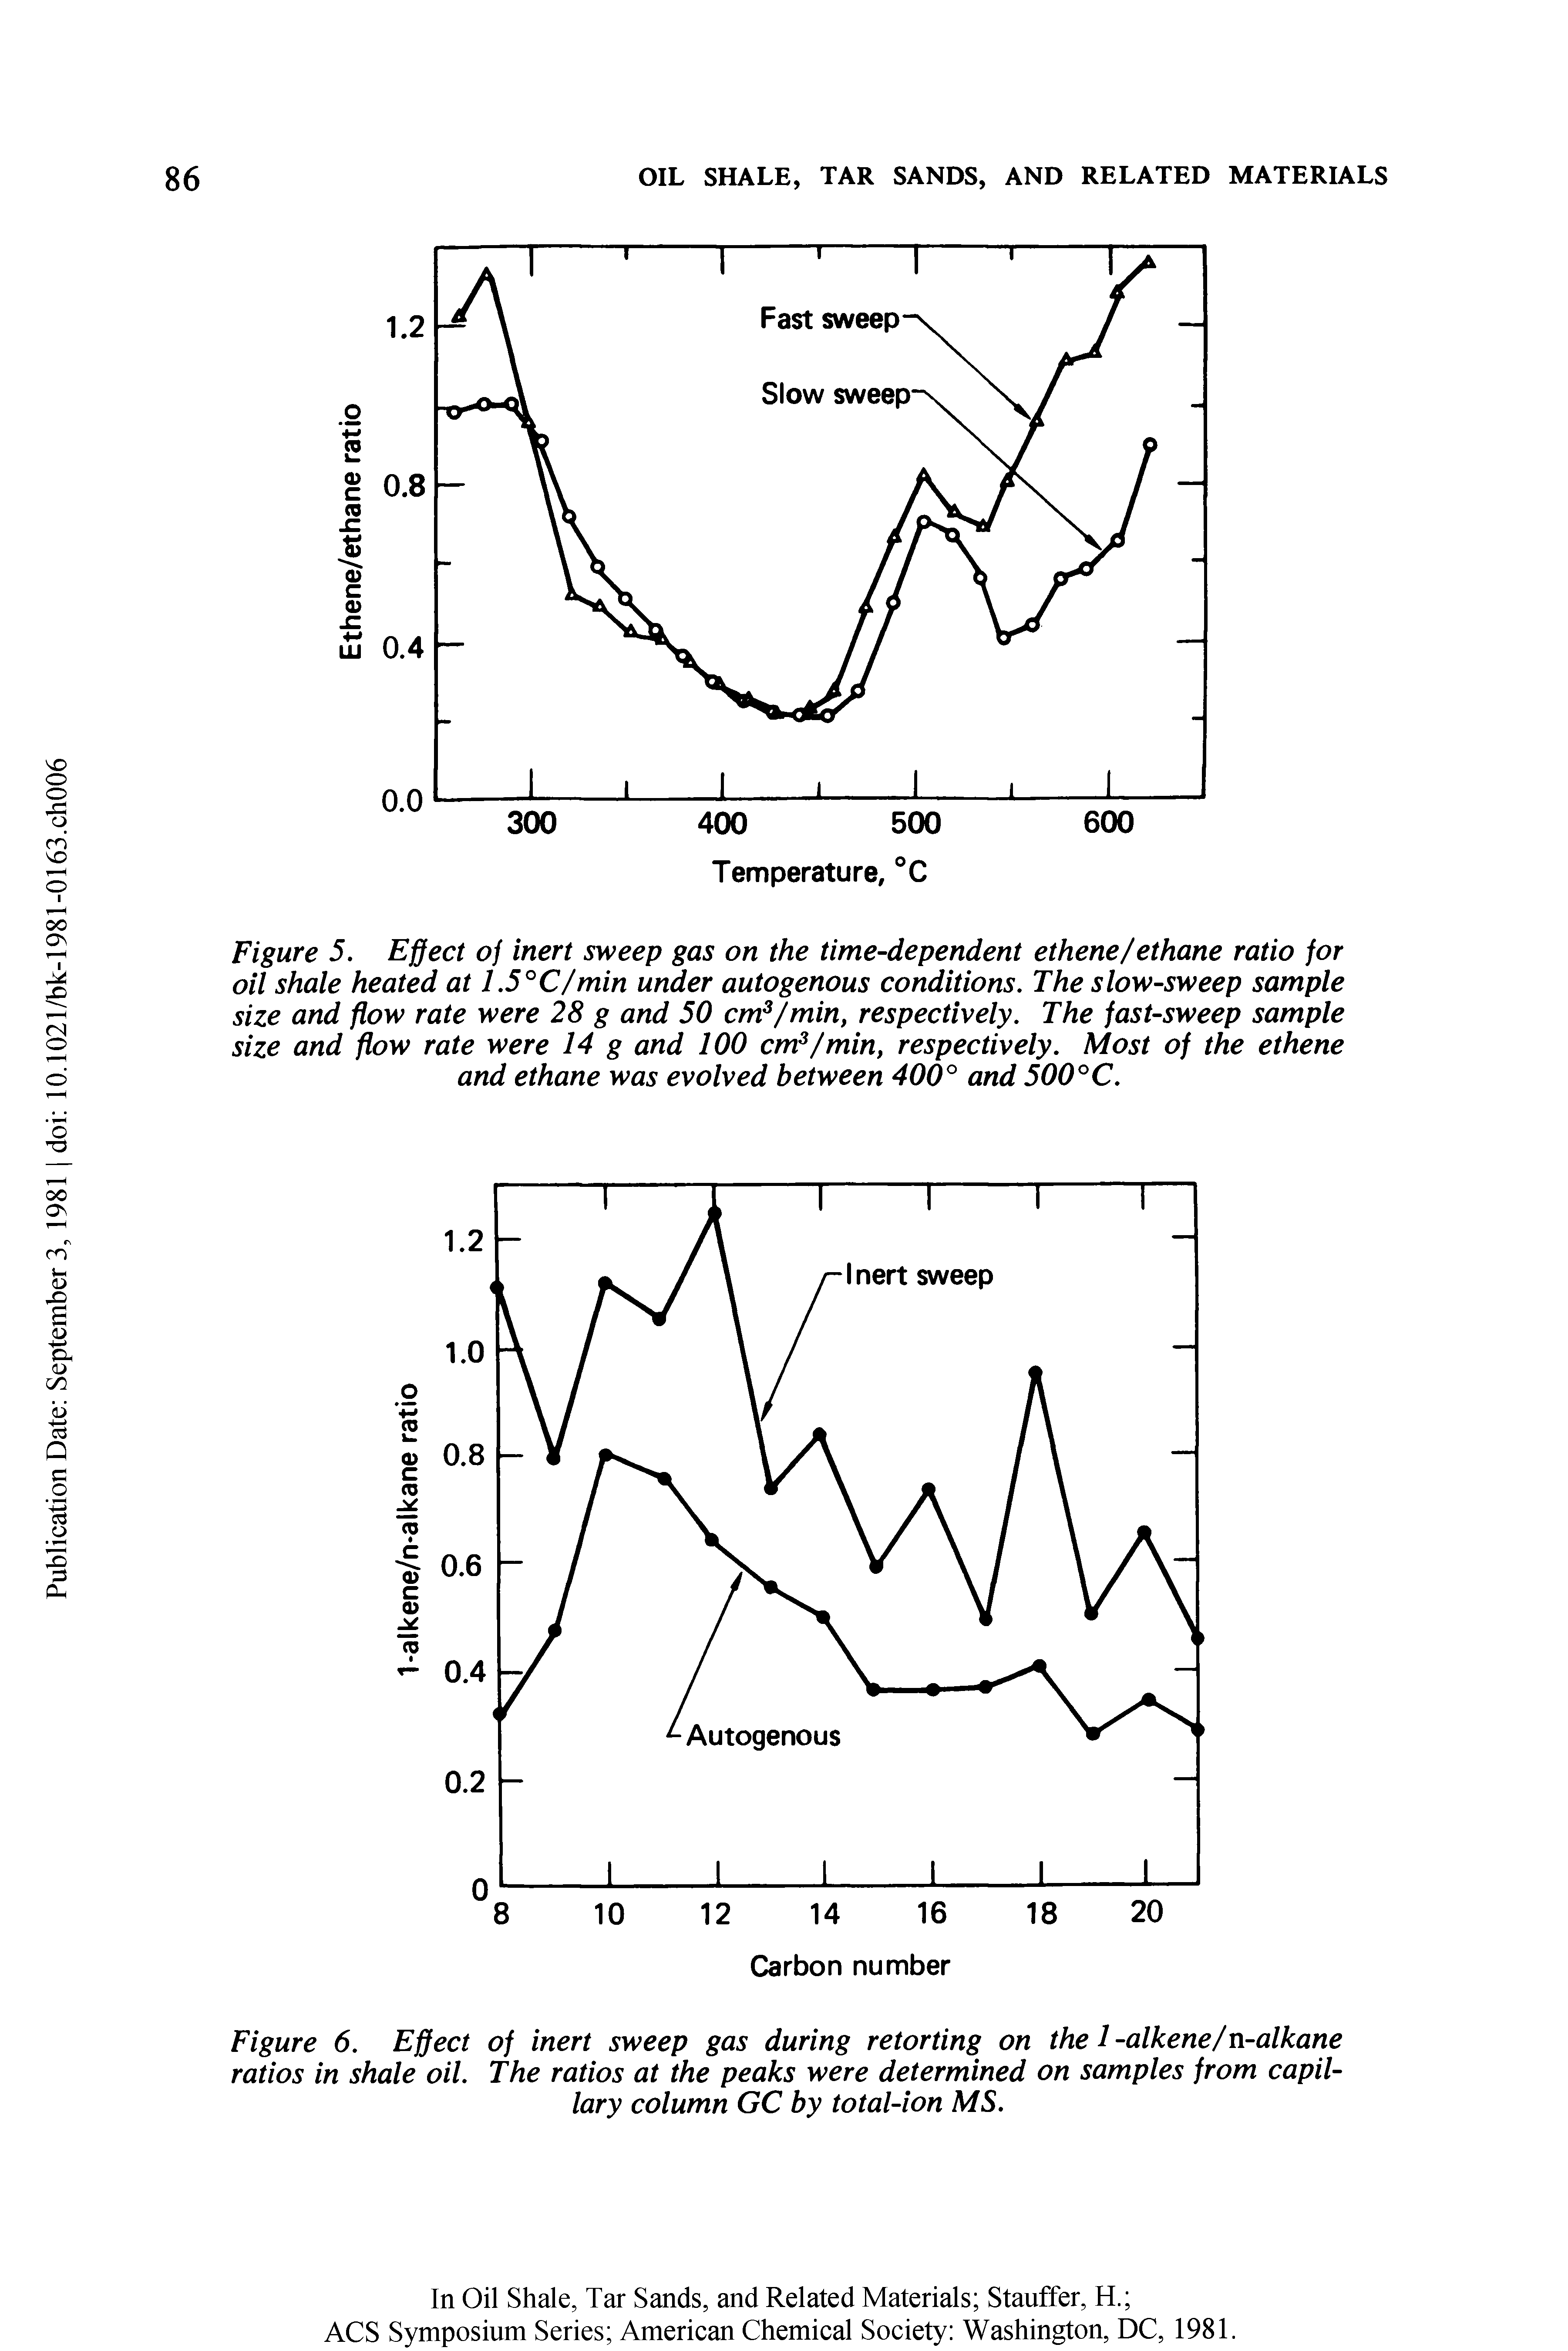 Figure 5. Effect of inert sweep gas on the time-dependent ethene/ethane ratio for oil shale heated at 1.5°C/min under autogenous conditions. The slow-sweep sample size and flow rate were 28 g and 50 cm3/min, respectively. The fast-sweep sample size and flow rate were 14 g and 100 cm3/min, respectively. Most of the ethene and ethane was evolved between 400° and 500°C.